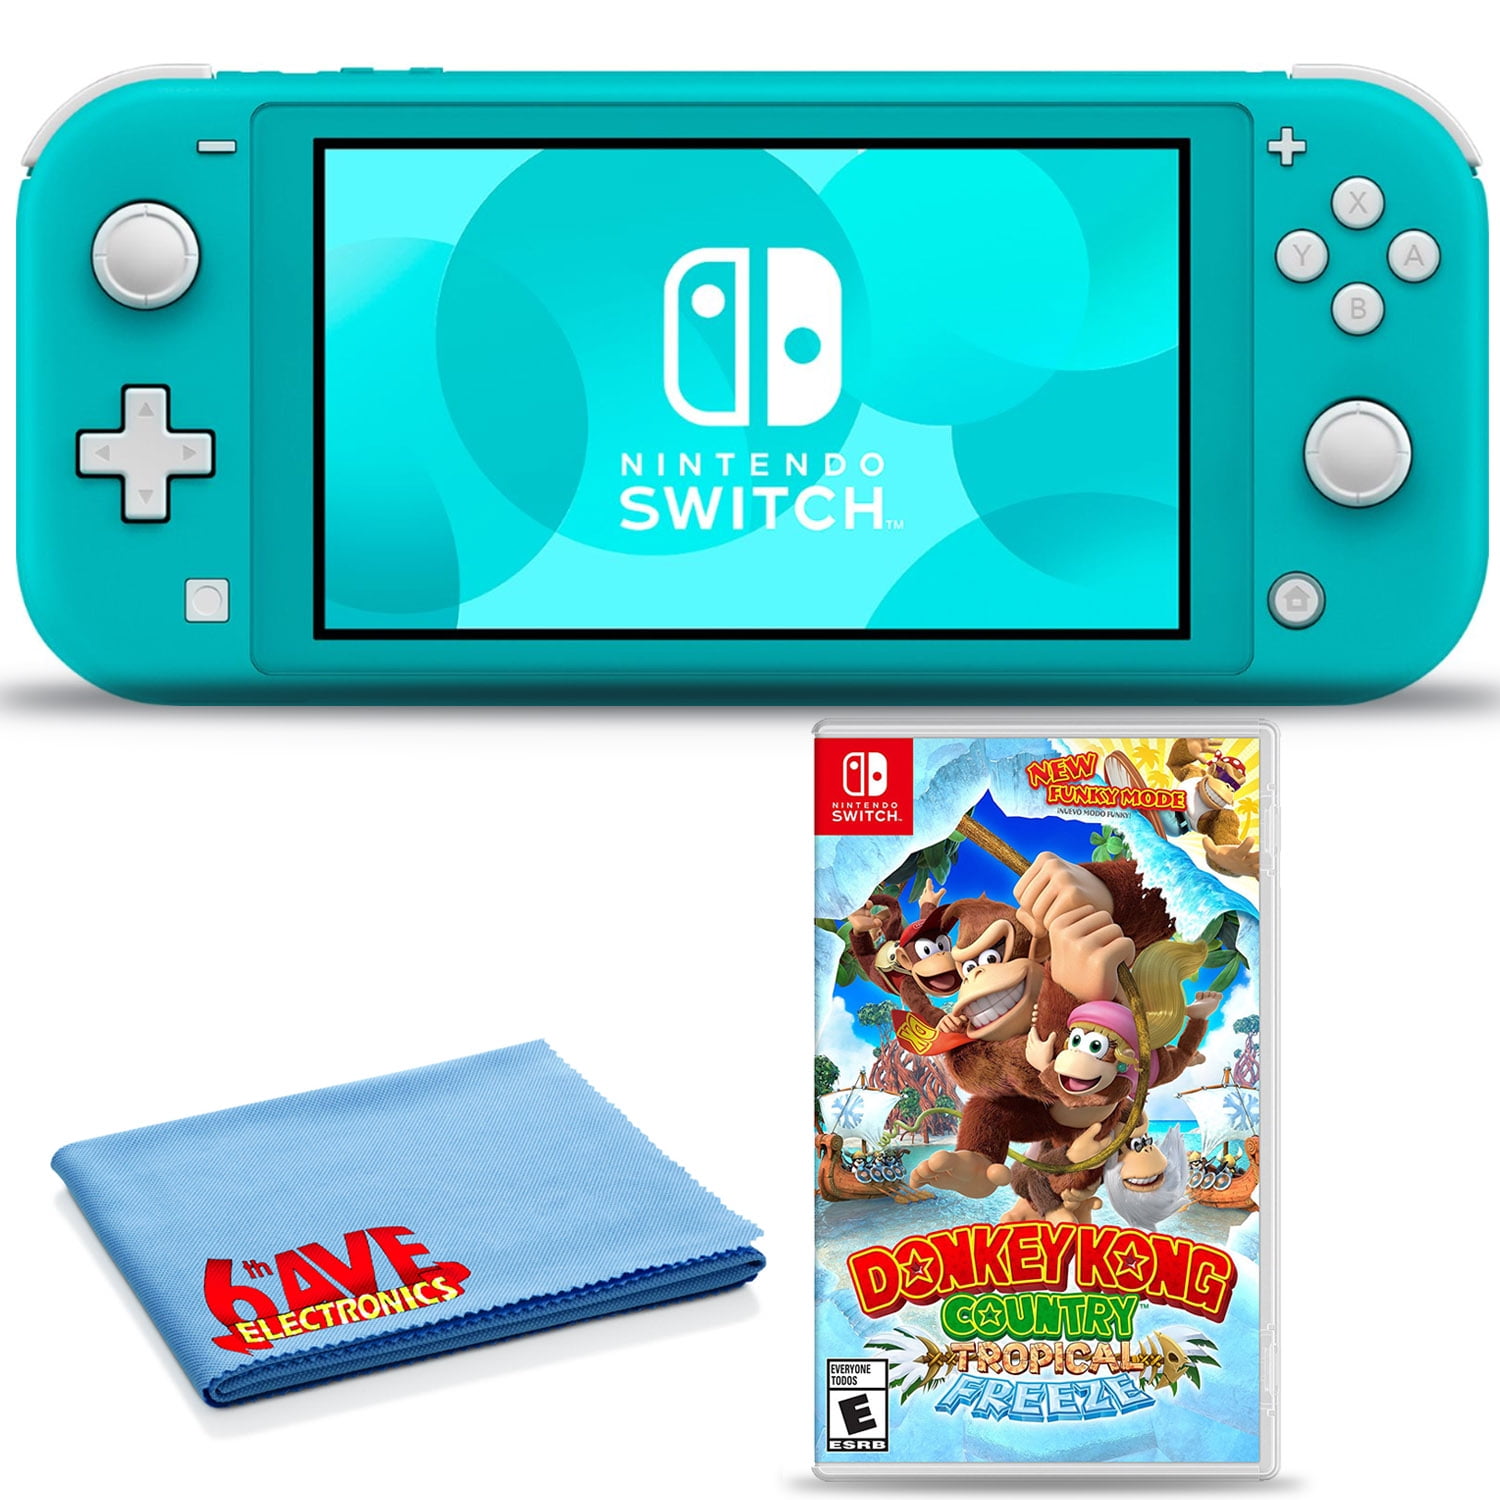 Nintendo Switch Lite (Turquoise) Bundle with 6Ave Cleaning Cloth + Donkey  Kong Country: Tropical Freeze